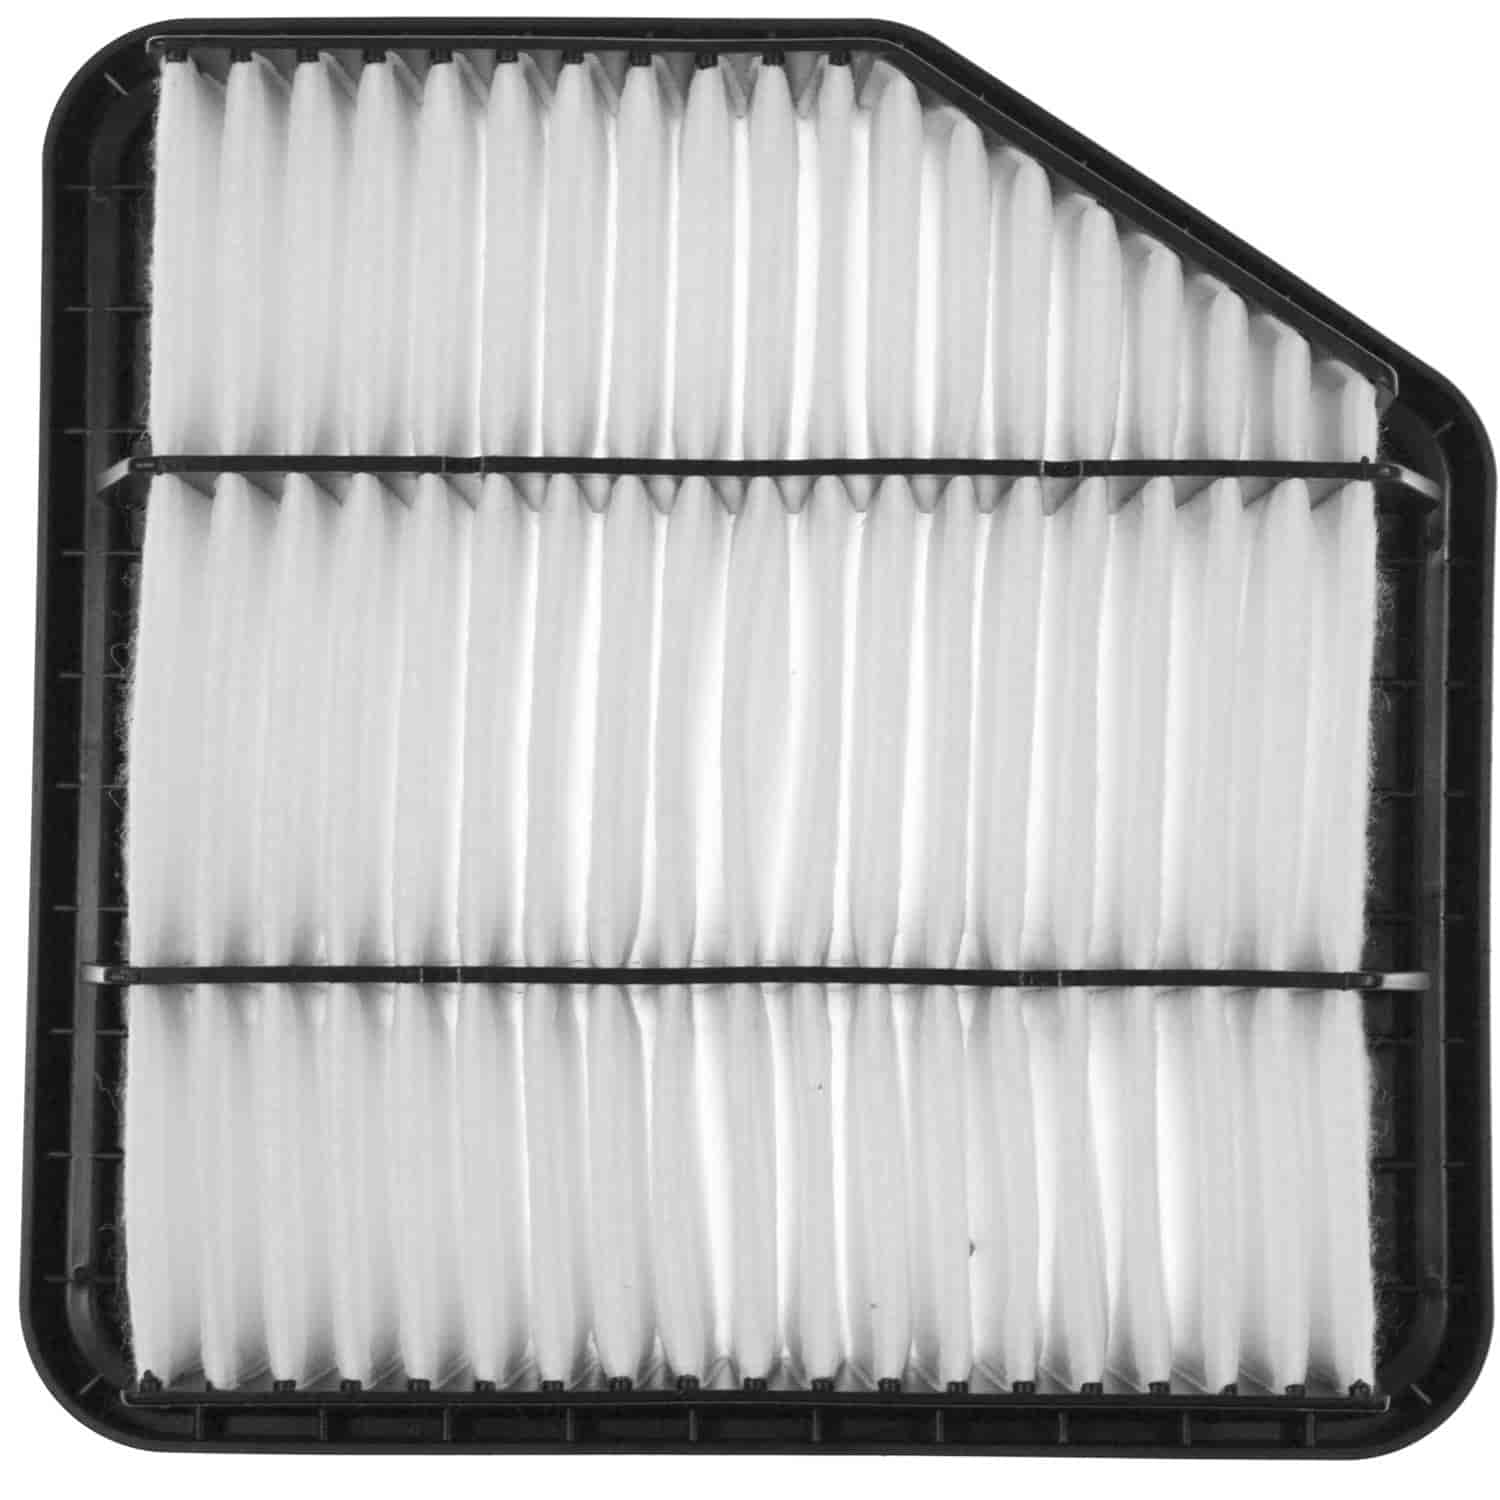 Mahle Air Filter 2006-2015 Lexus IS250/IS350/GS350/GS430 2.5/3.5/4.3L